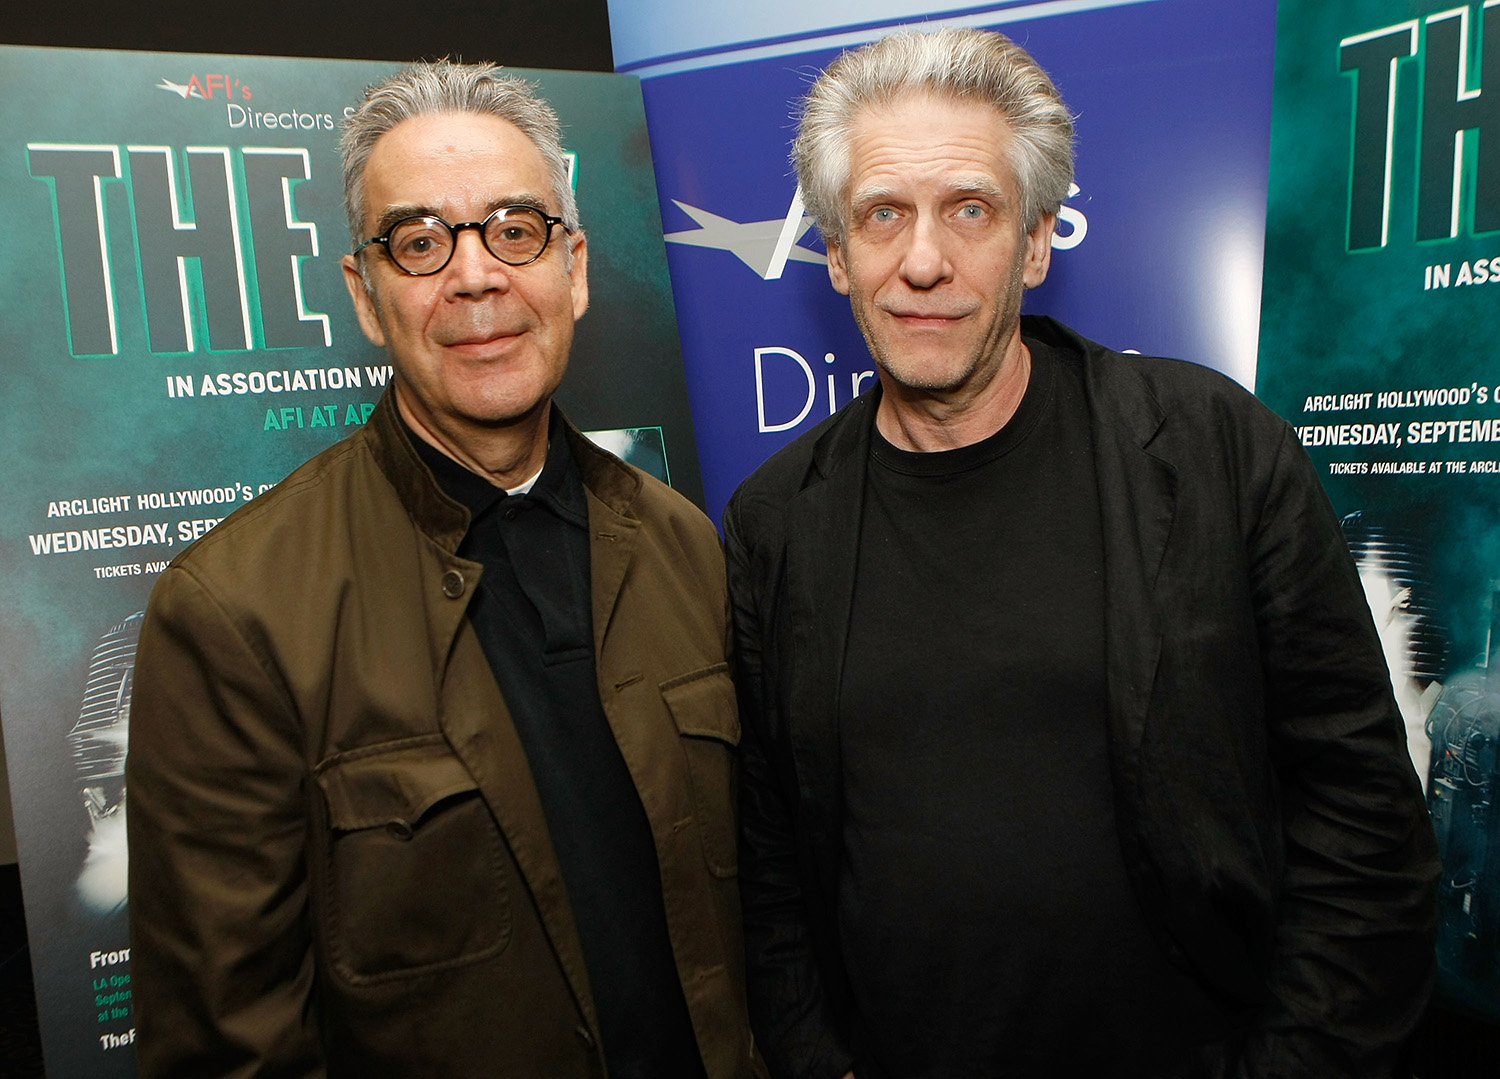 LOS ANGELES, CA - SEPTEMBER 03: Composer Howard Shore (L) and director David Cronenberg attend AFI Directors Screening Of "The Fly" With David Cronenberg on September 3, 2008 in Los Angeles, California. (Photo by Michael Buckner/Getty Images)